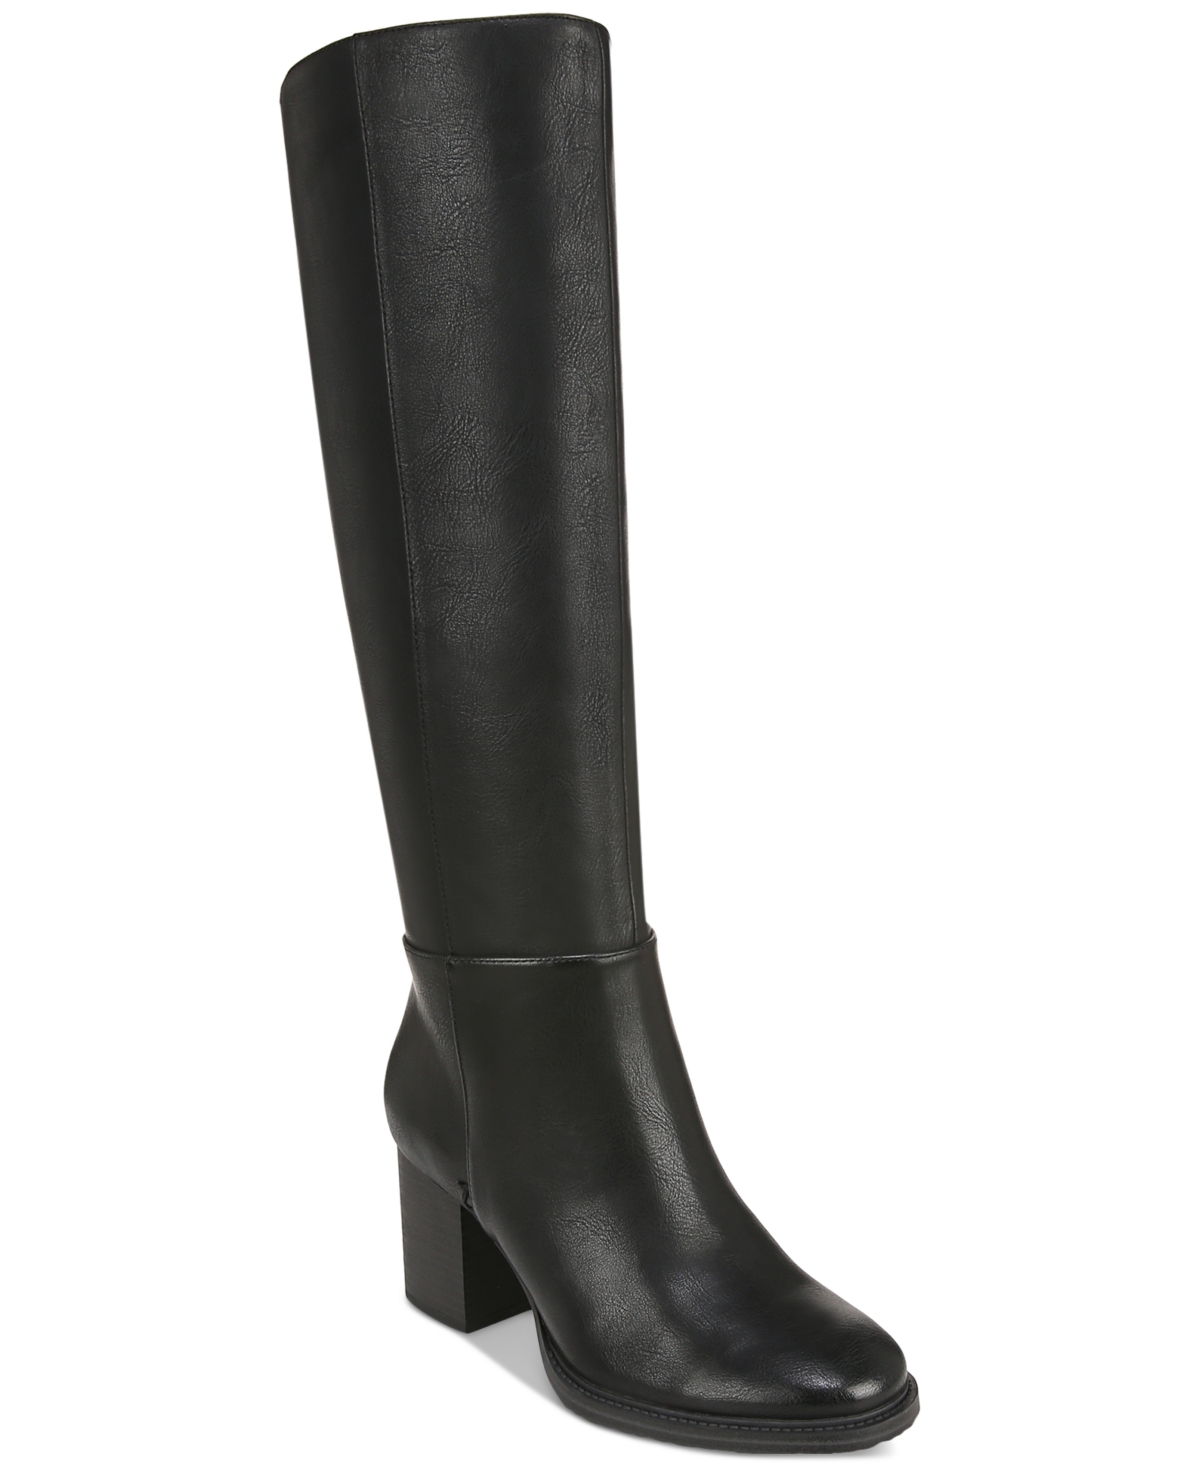 Women's Riona Wide-Calf Block-Heel Riding Boots - Black Leather